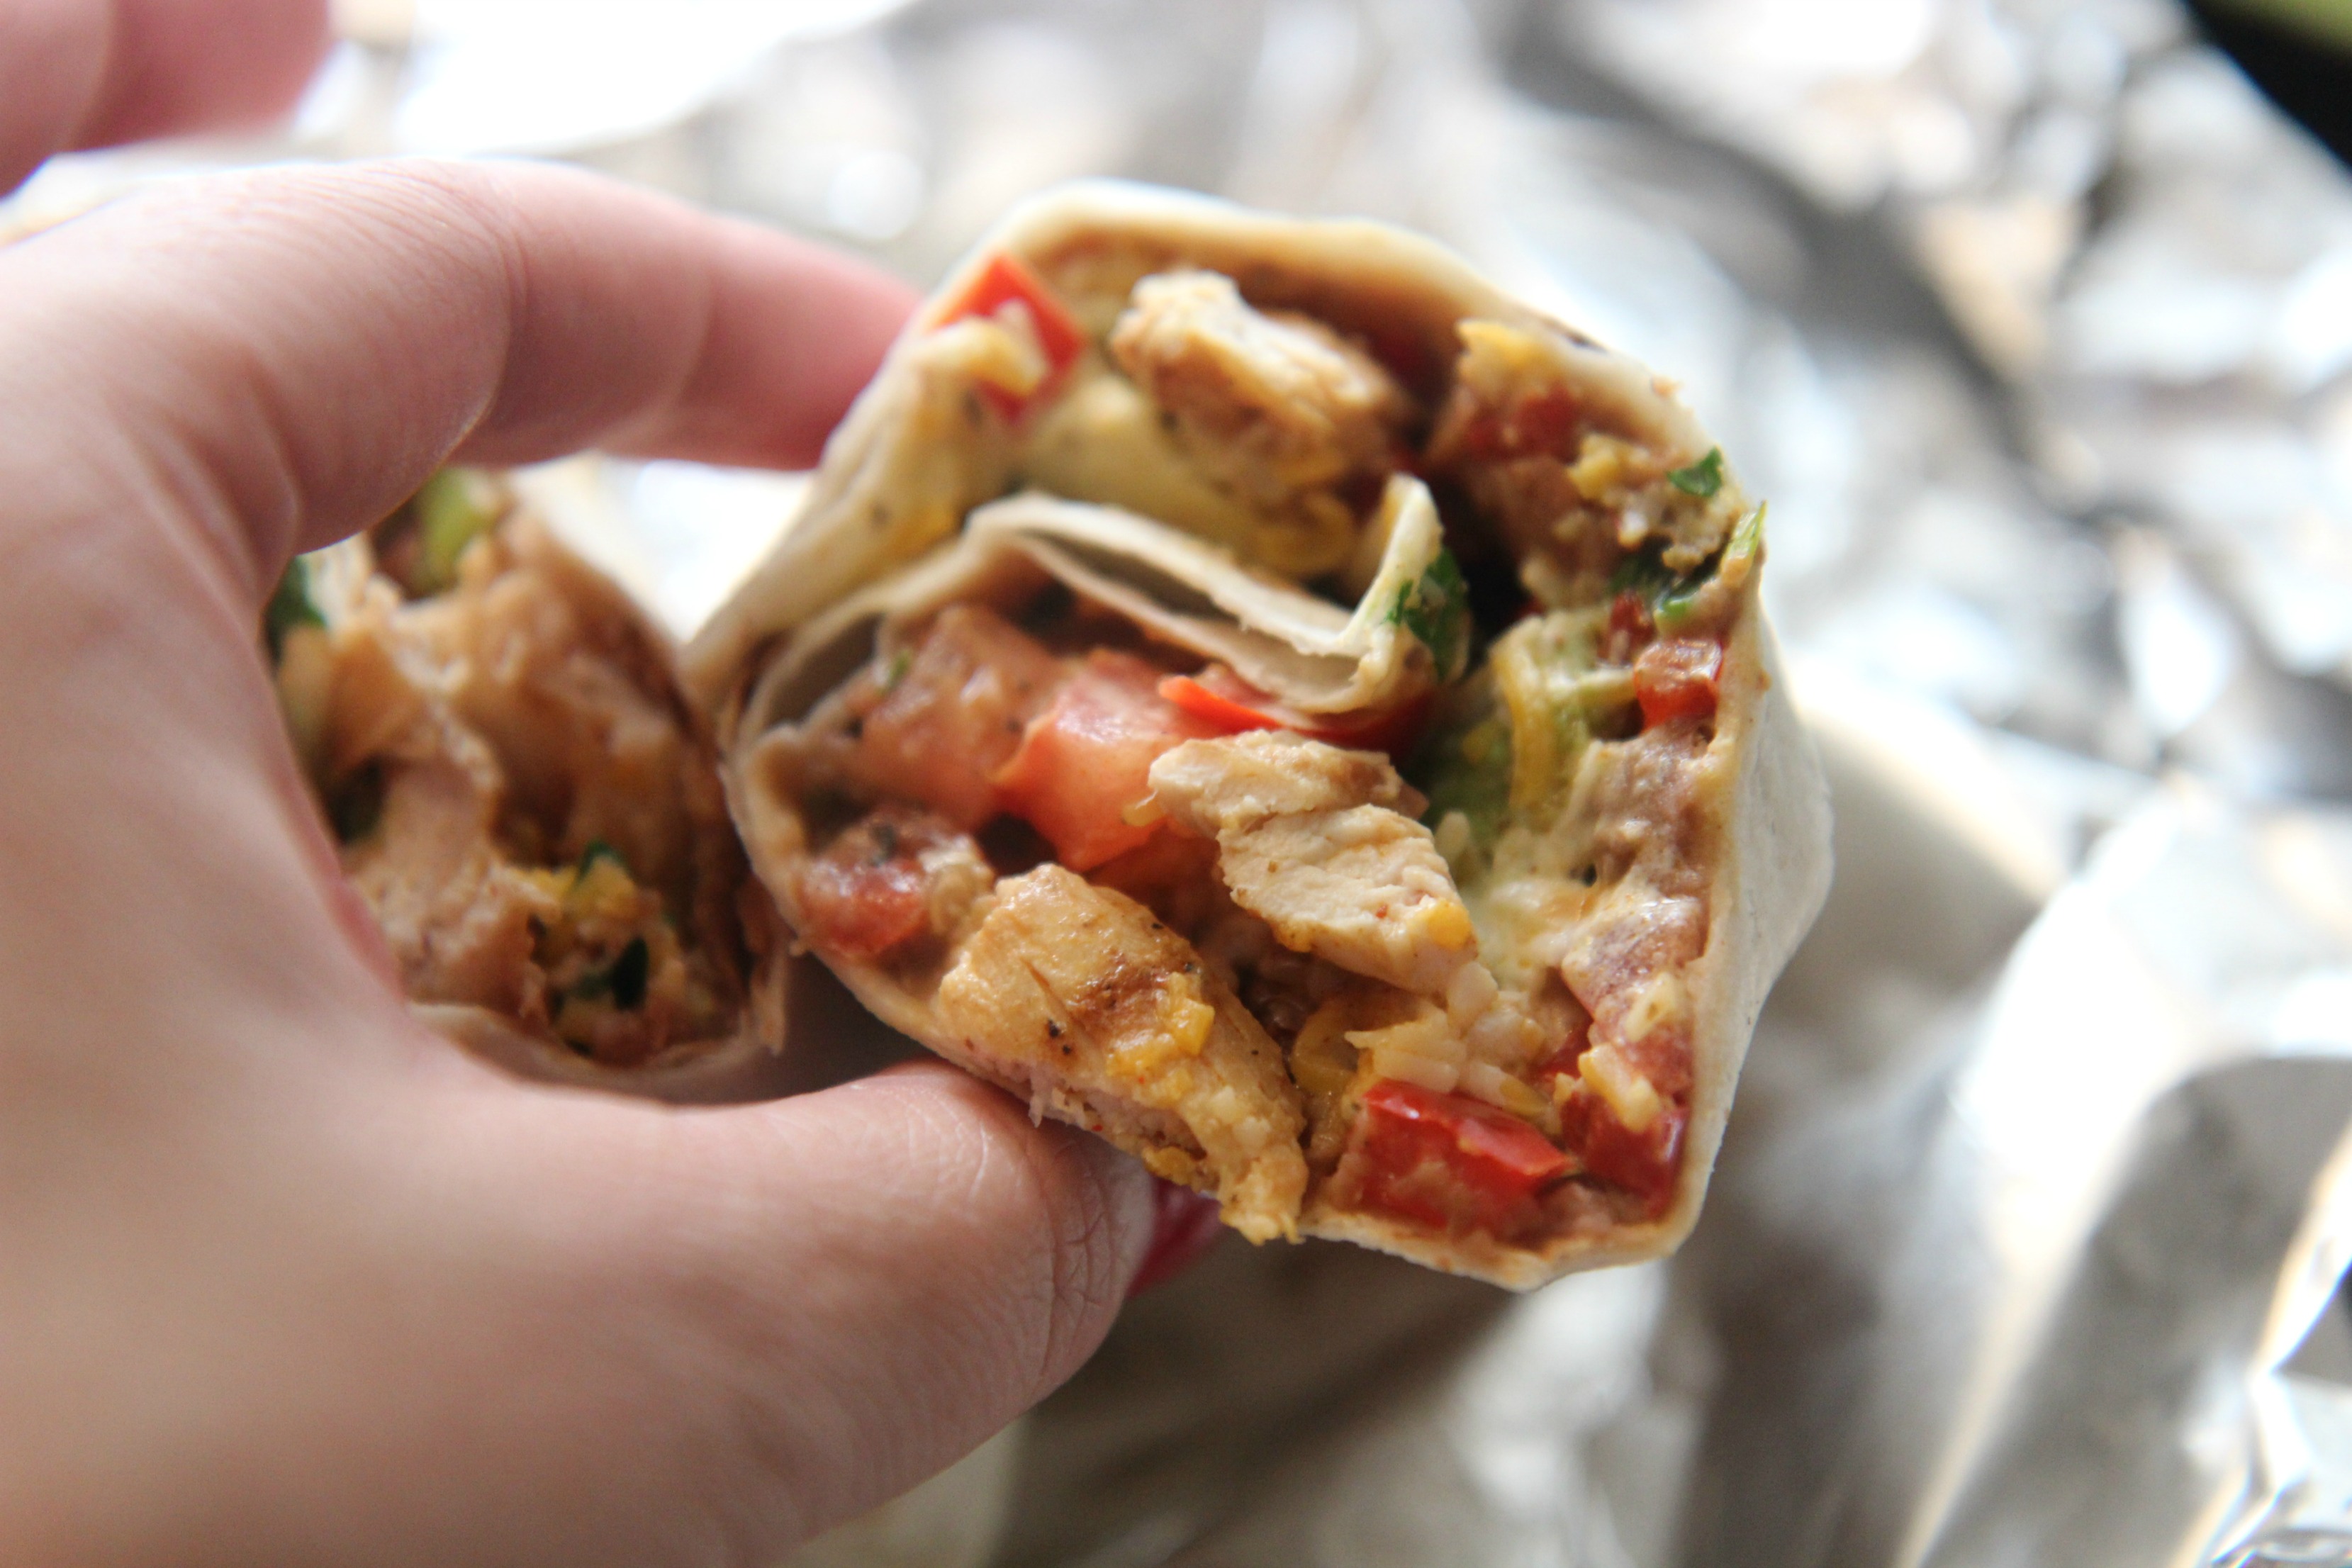 Served with sour cream and hot sauce, this Tex-Mex burrito is the perfect lunch.